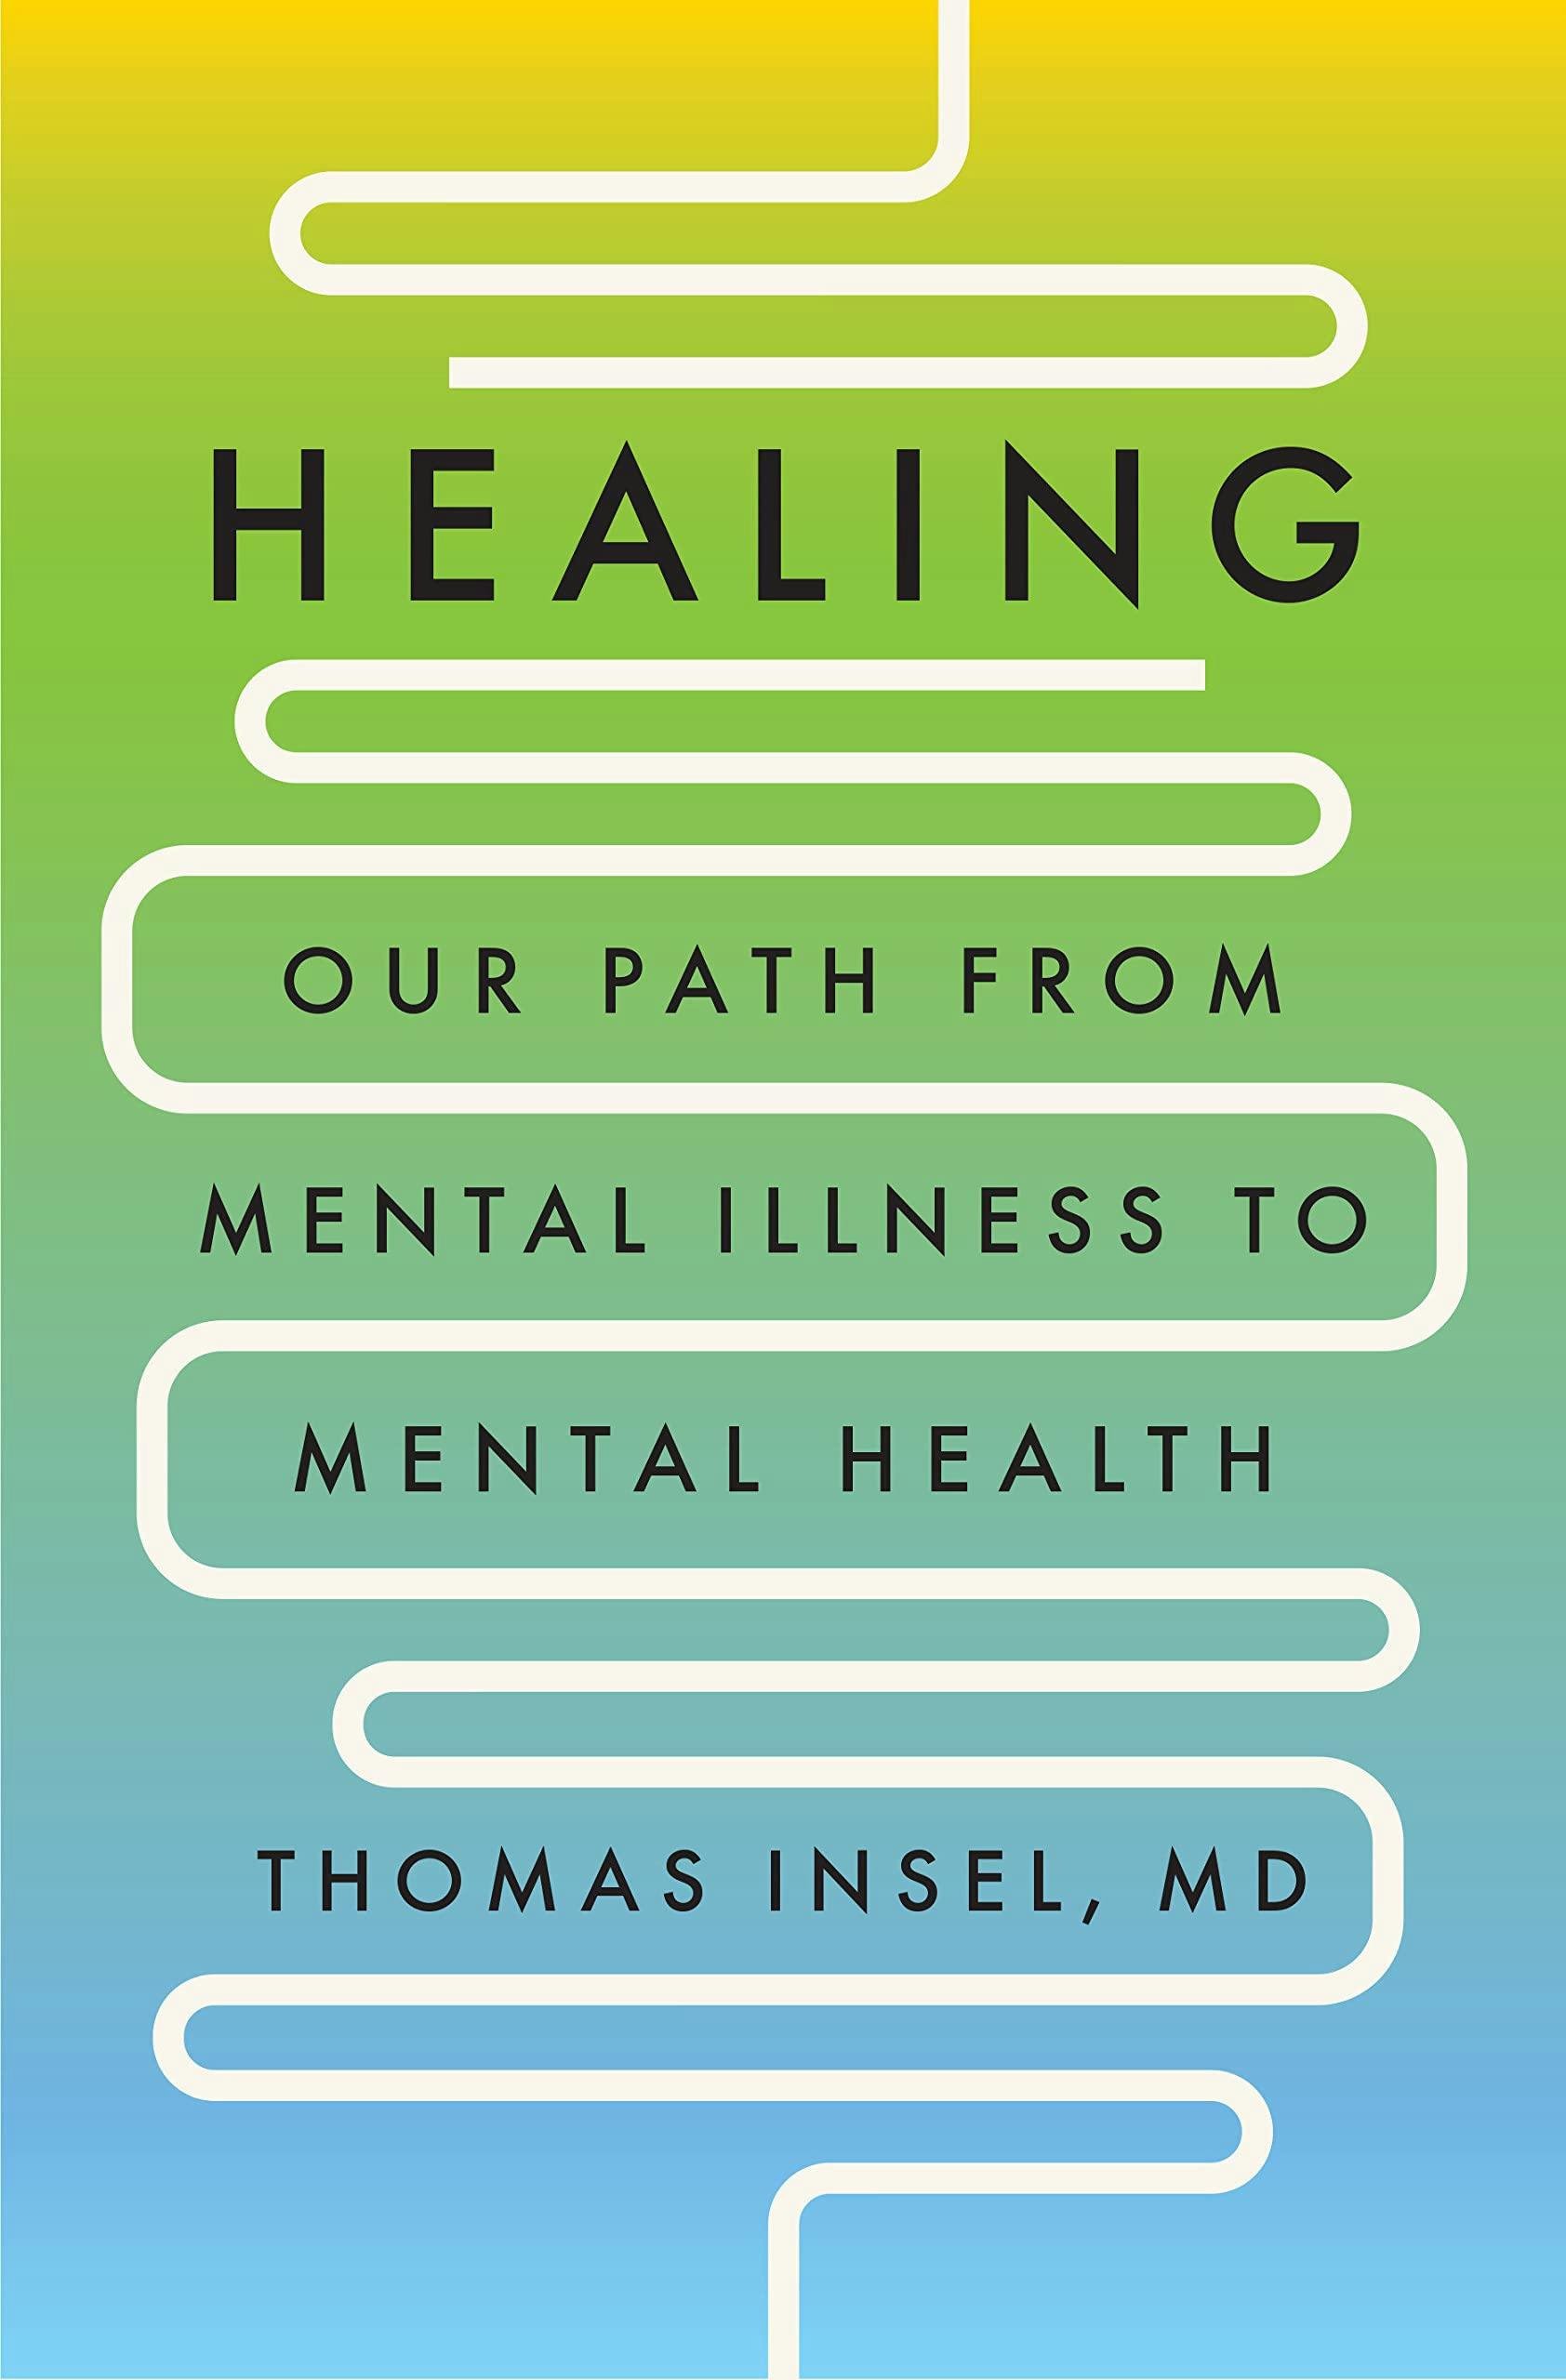 Healing: Our Path From Mental Illness to Mental Health by Thomas Insel, MD